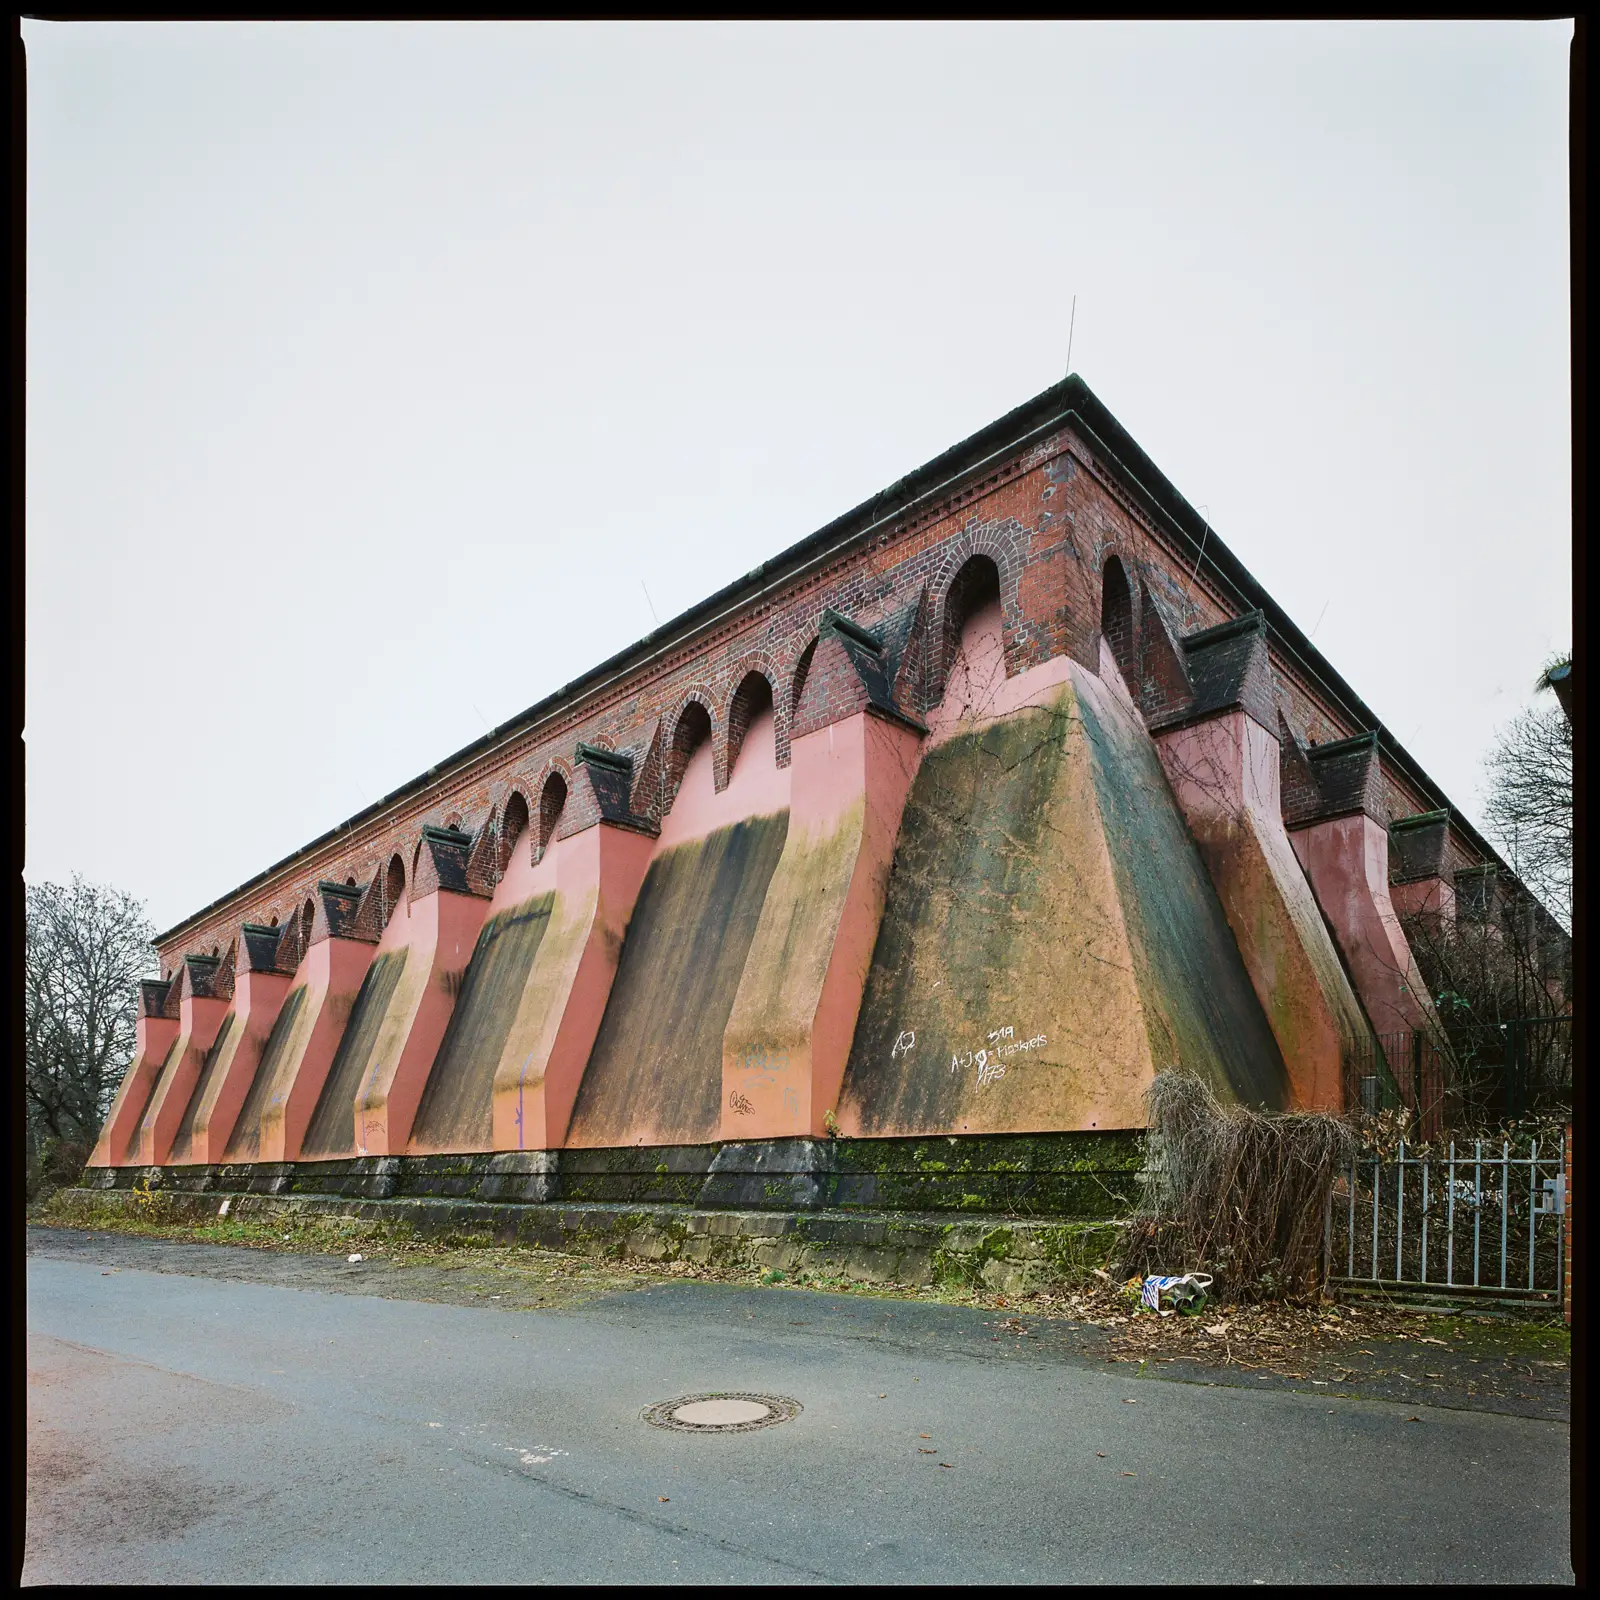 6x6 photograph of the run-down looking water reservoir on top of the Linden hill in Hannover